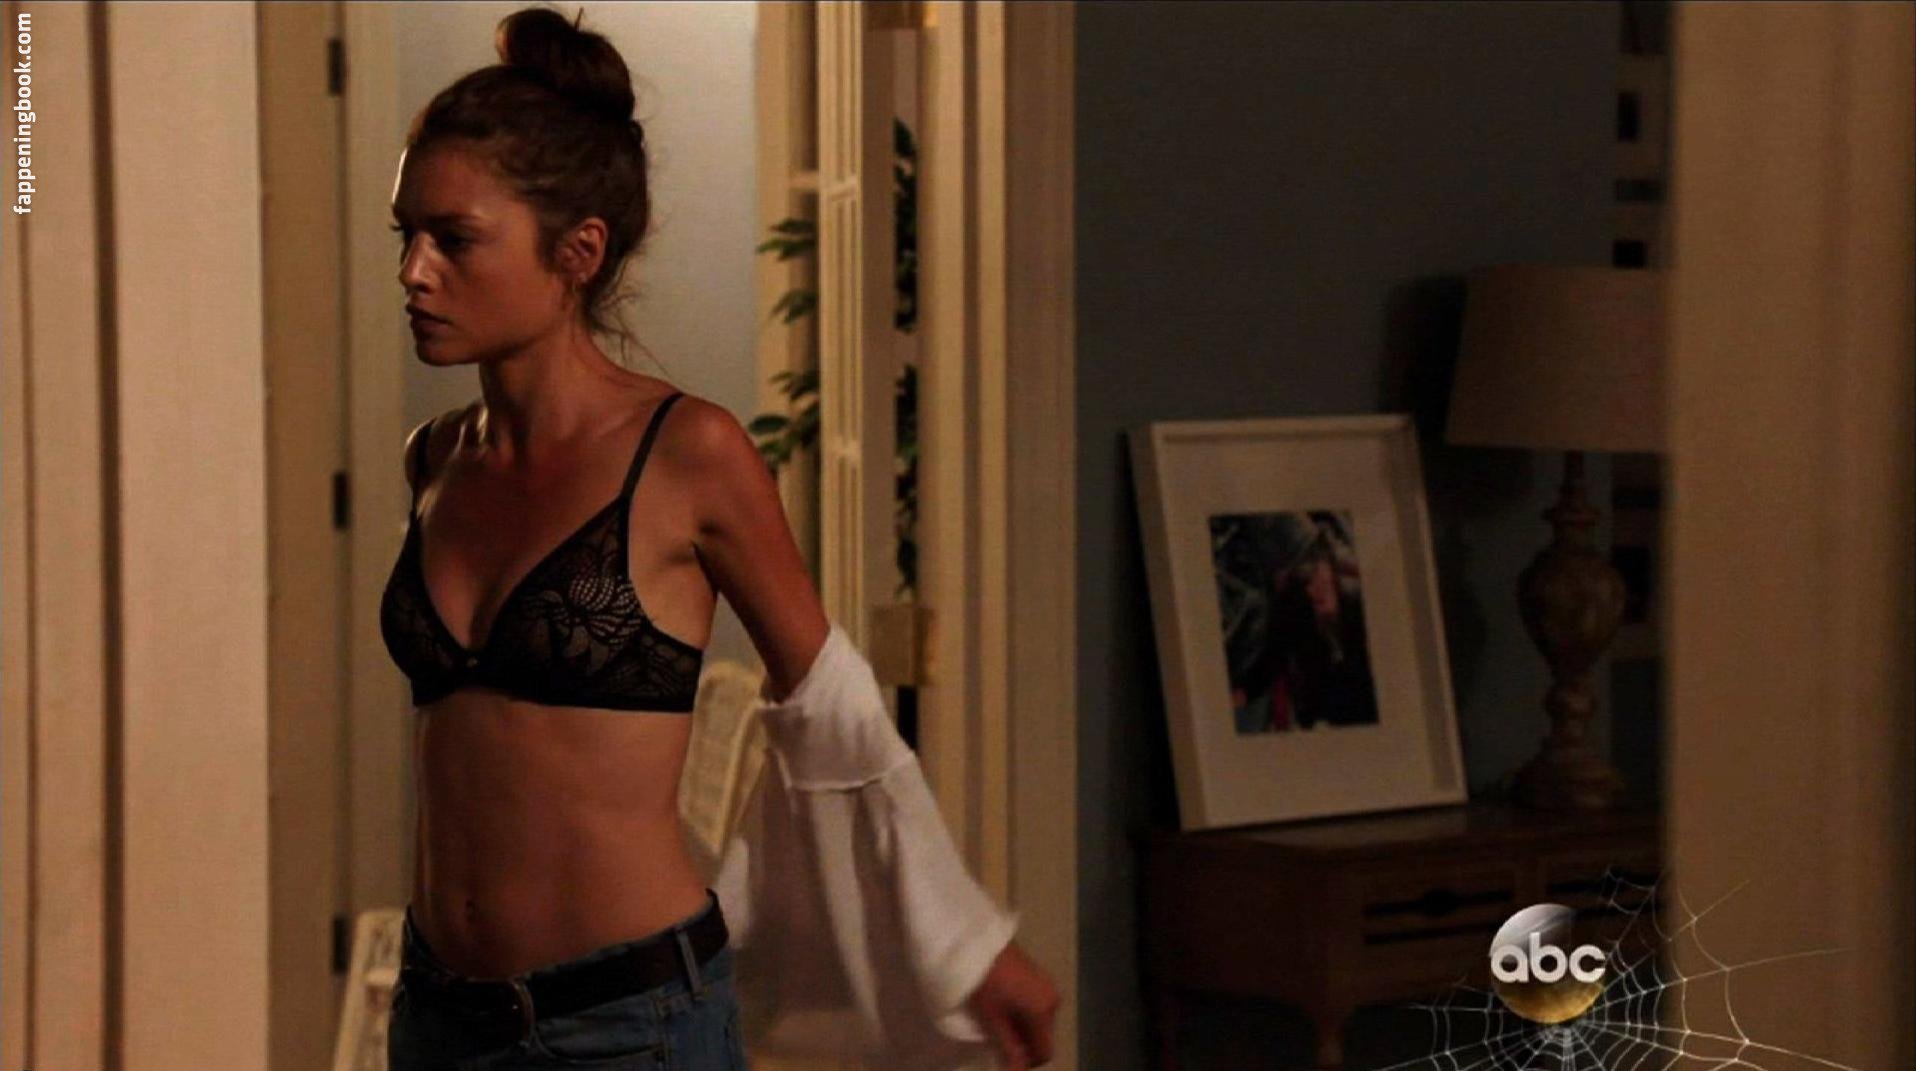 Hannah Ware Nude, The Fappening - Photo #211289 - FappeningBook.